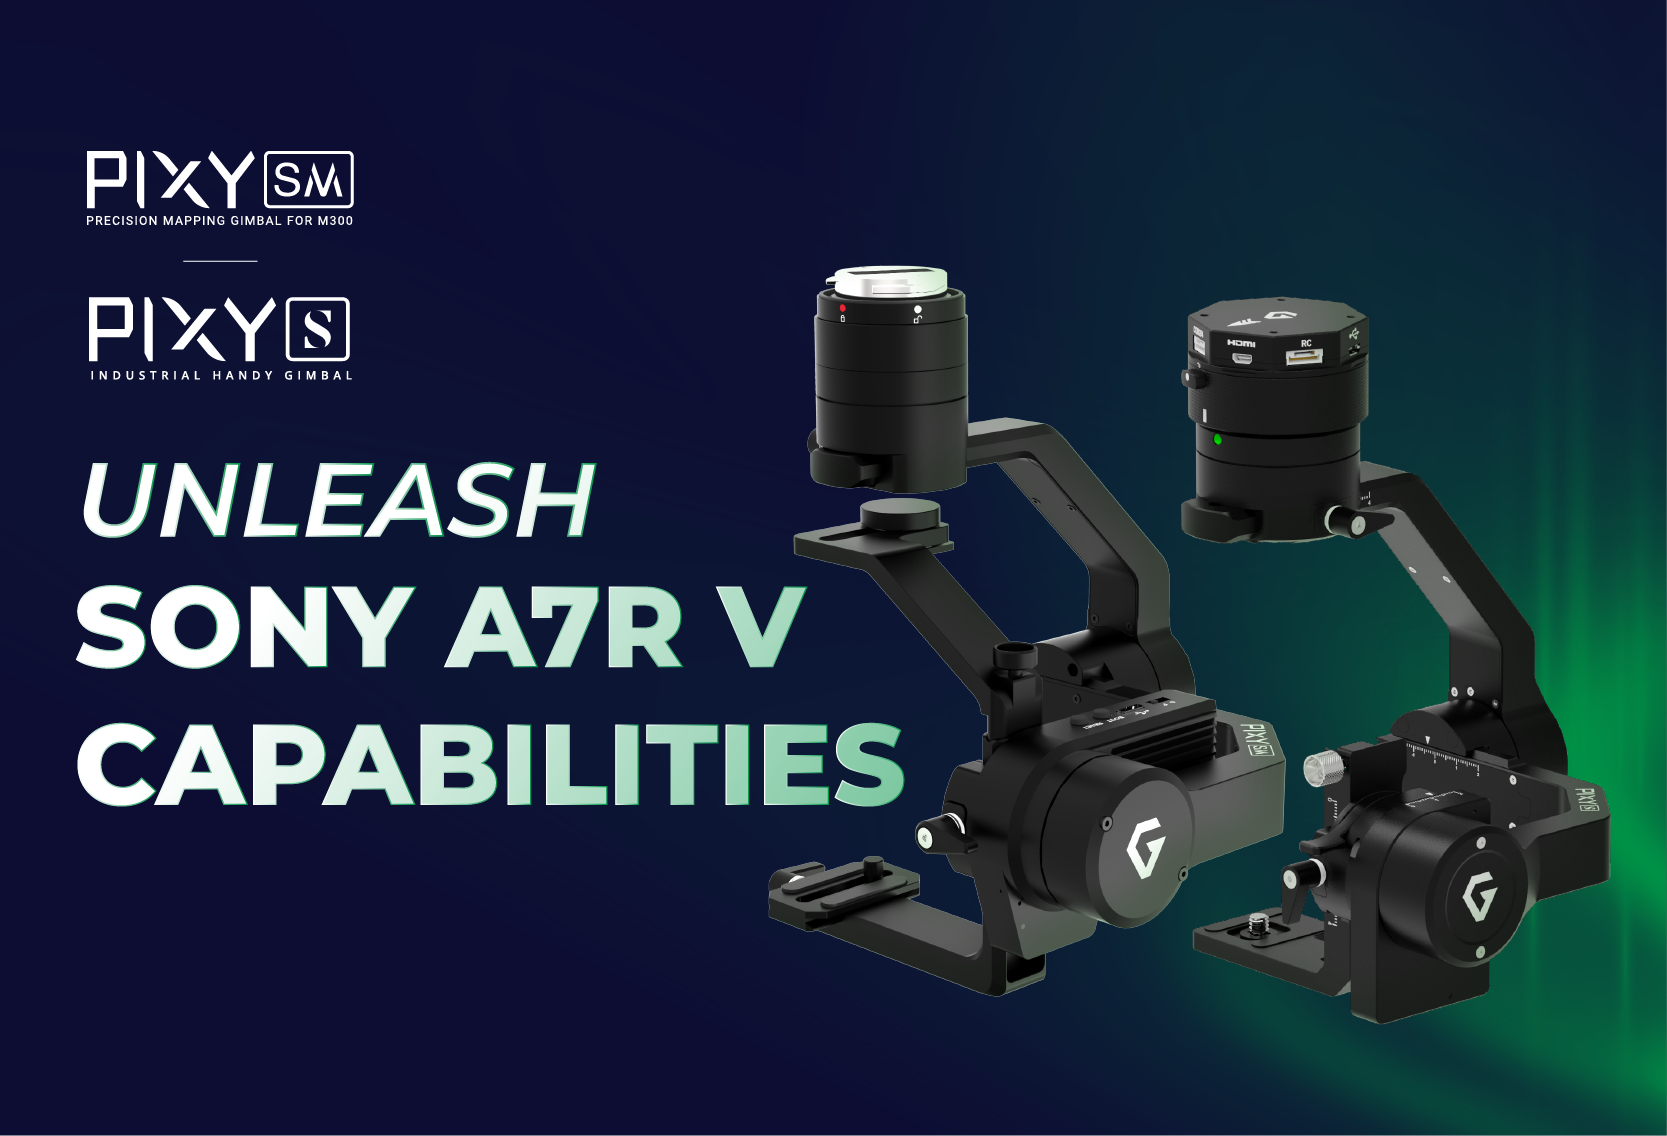 UNLEASH SONY A7R V CAPABILITIES WITH PIXY S & PIXY SM